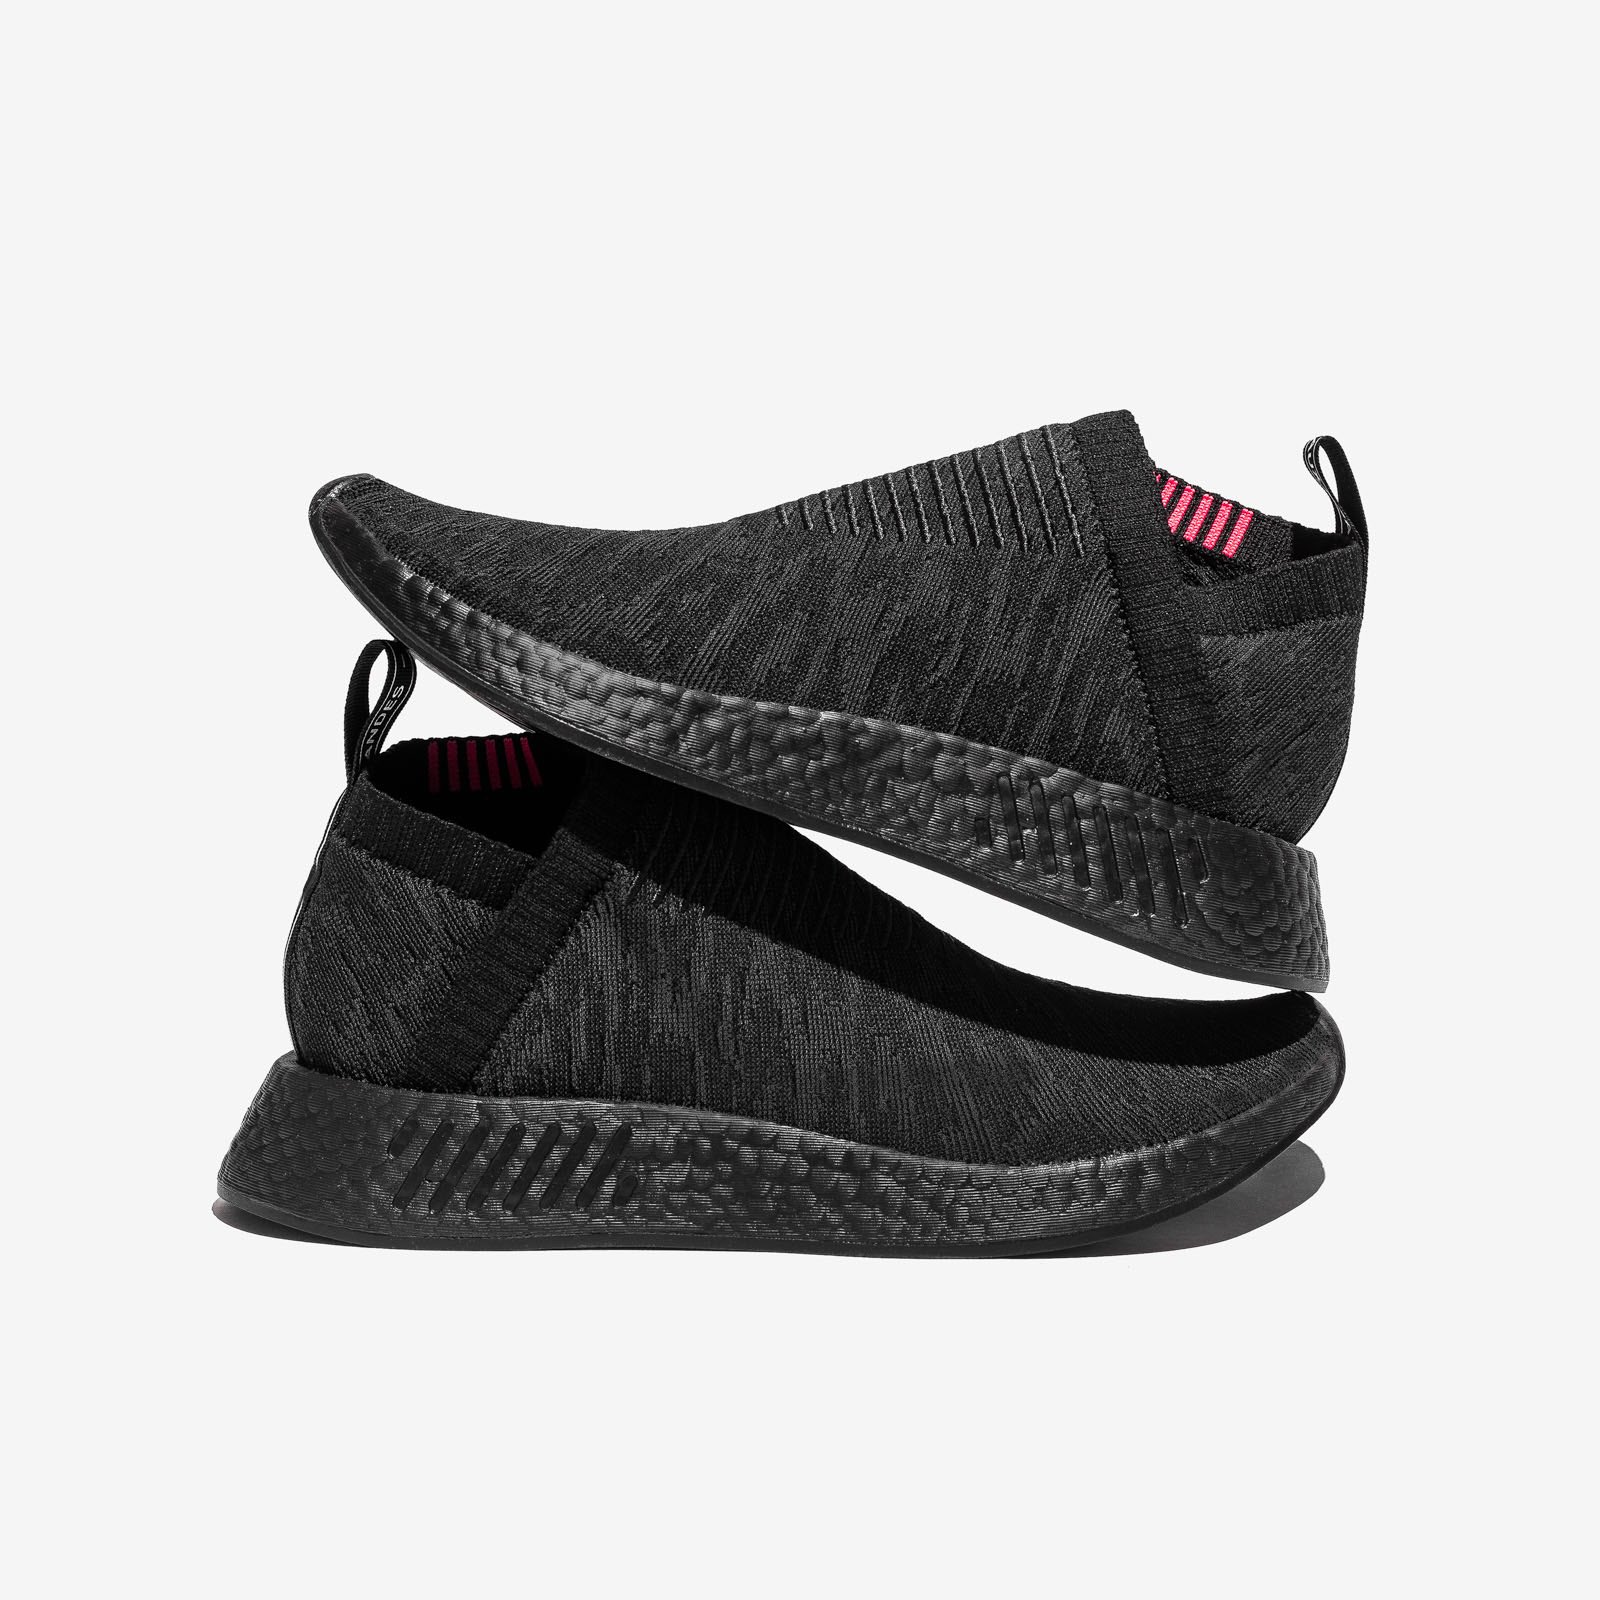 Capsule on Twitter: "The adidas NMD CS2 Black” now available online // https://t.co/S7gWqcGqVR / Twitter